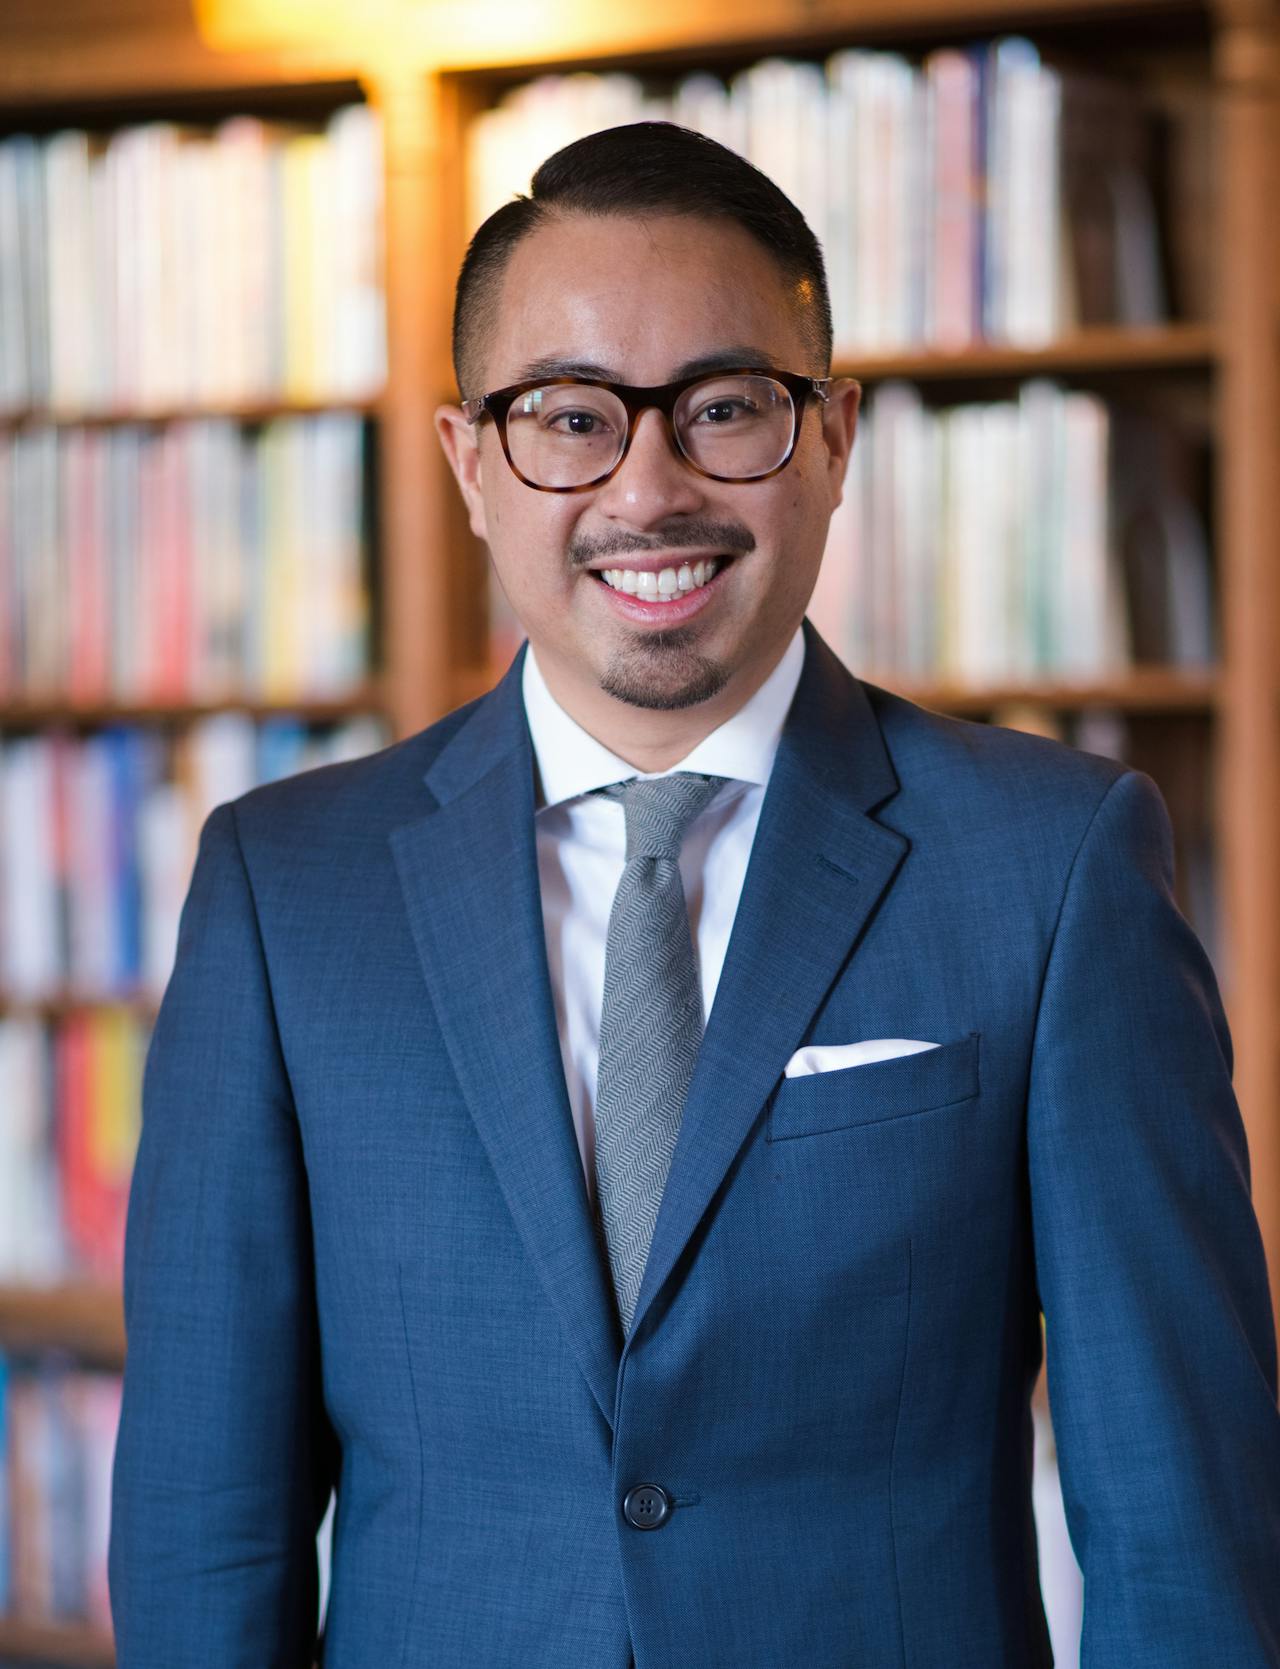 Dr. Mike Hoa Nguyen, assistant professor at the Morgridge College of Education at the University of Denver.